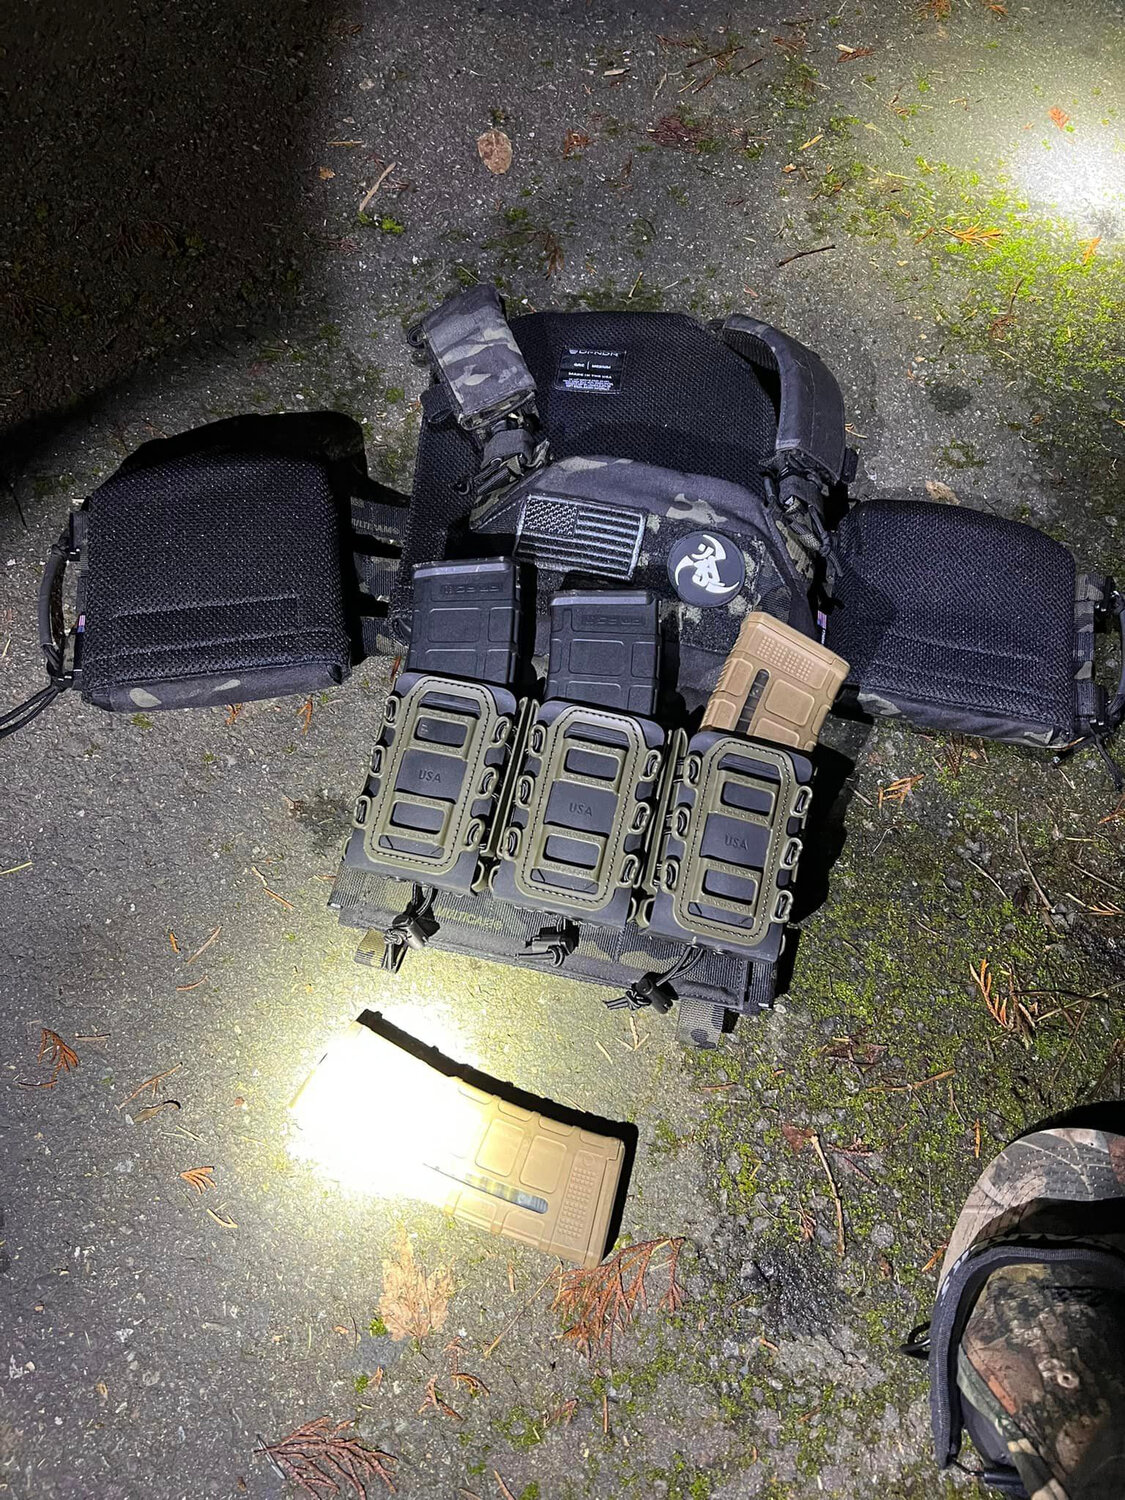 The suspect, armed with body armor and numerous weapons, was arrested and charged with first-degree assault with a deadly weapon against law enforcement.